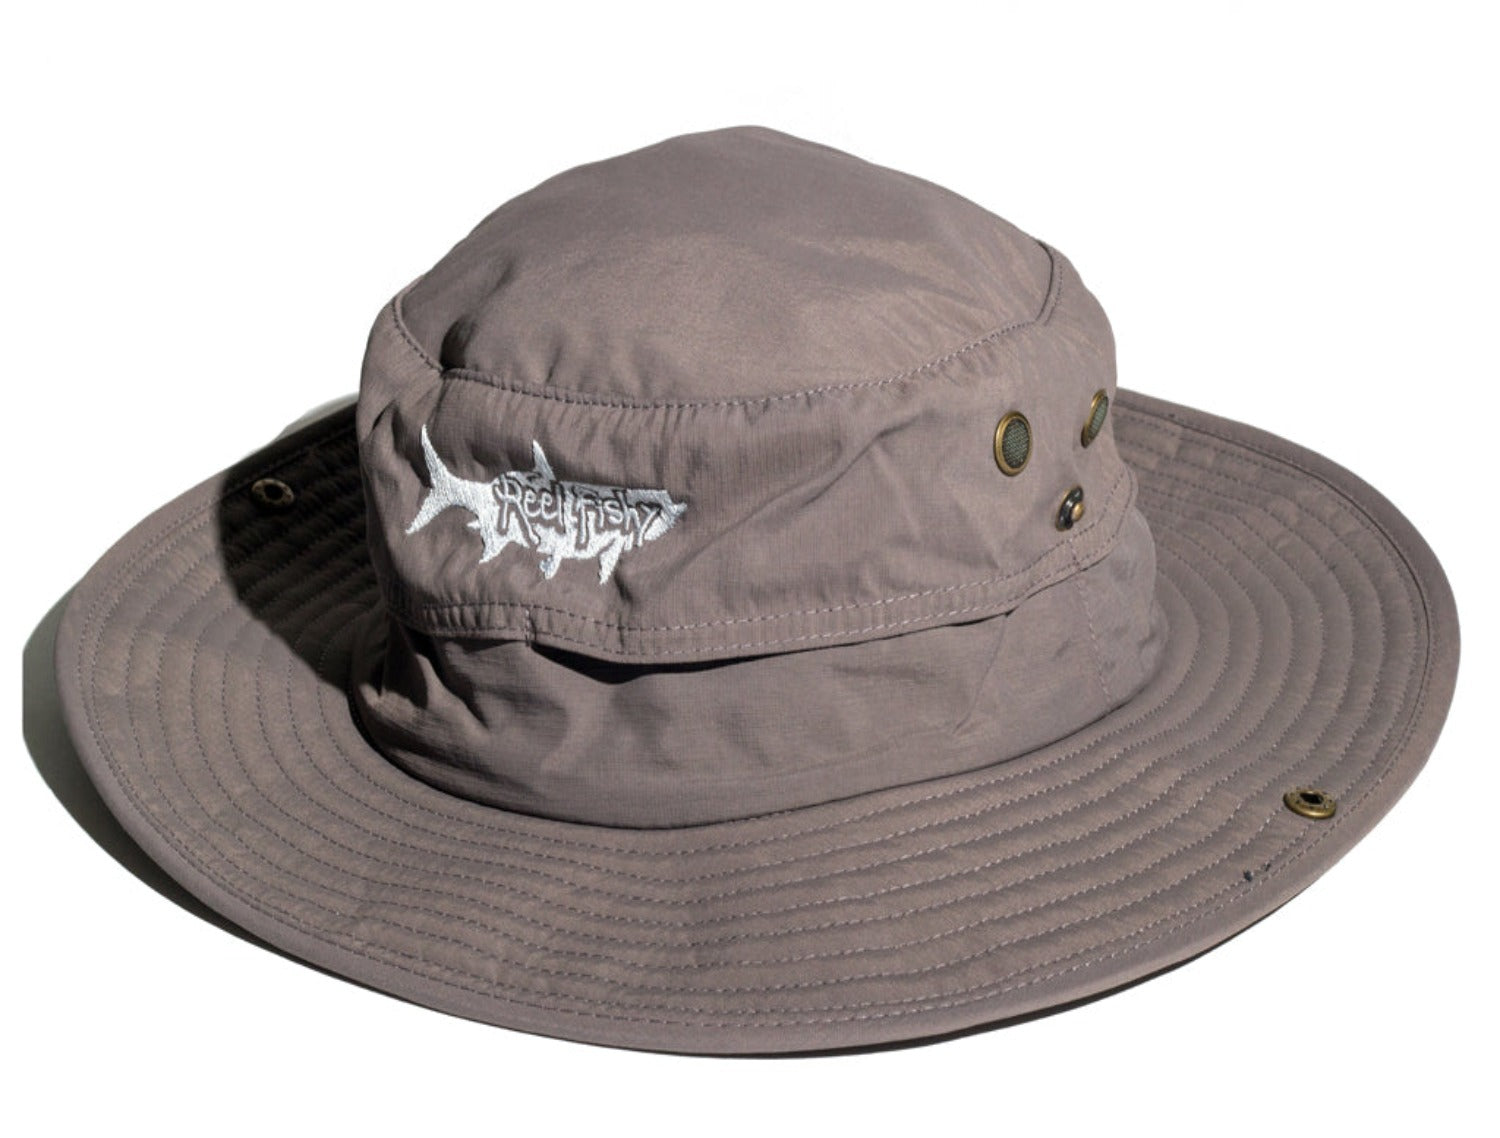 Boonie Fishing Sun Protection Hat with Reel Fishy Tarpon Logo - Charcoal